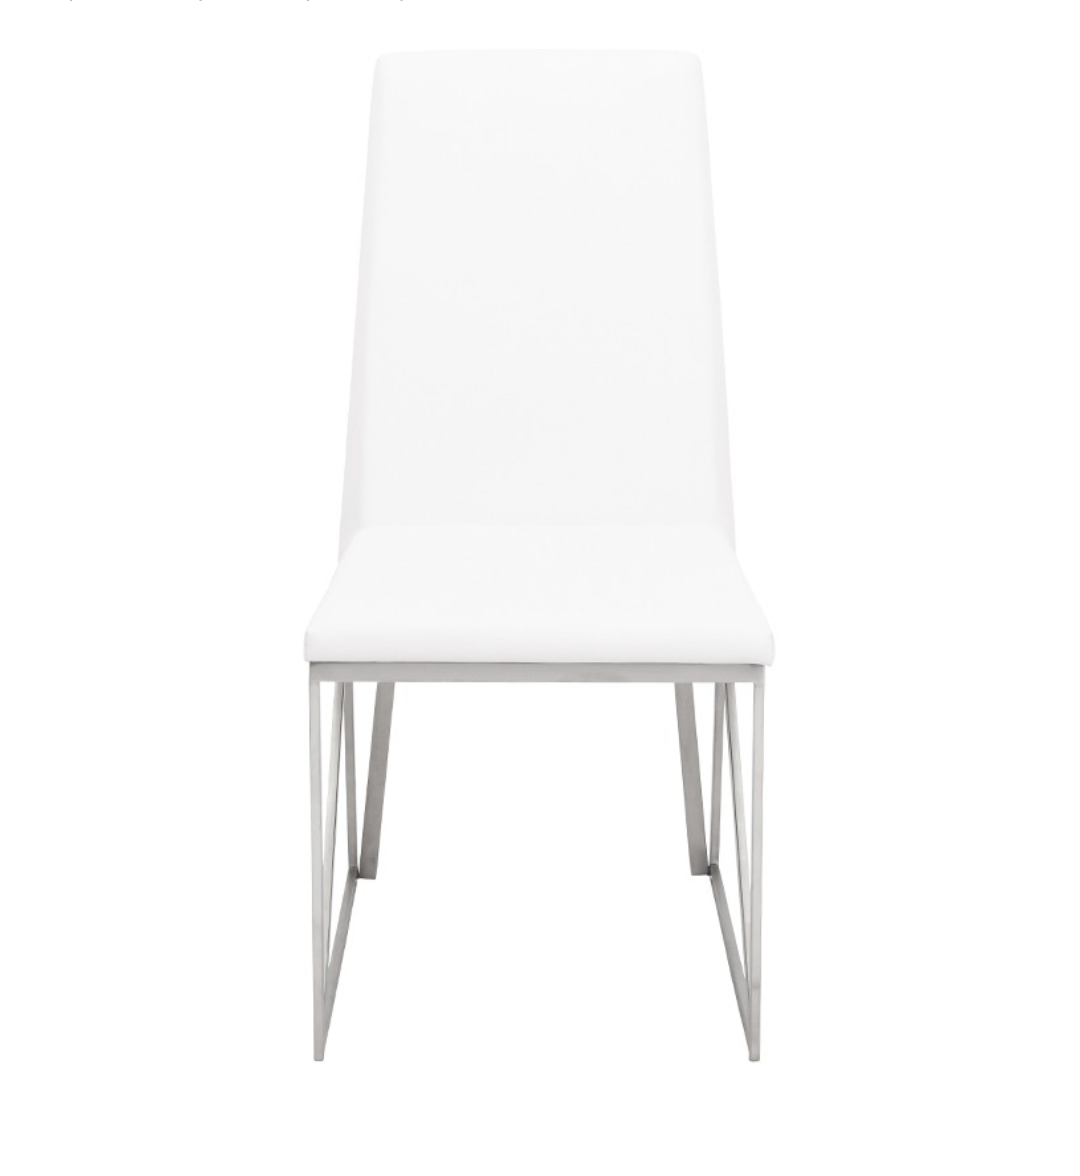 Caprice White Steel Dining Chair